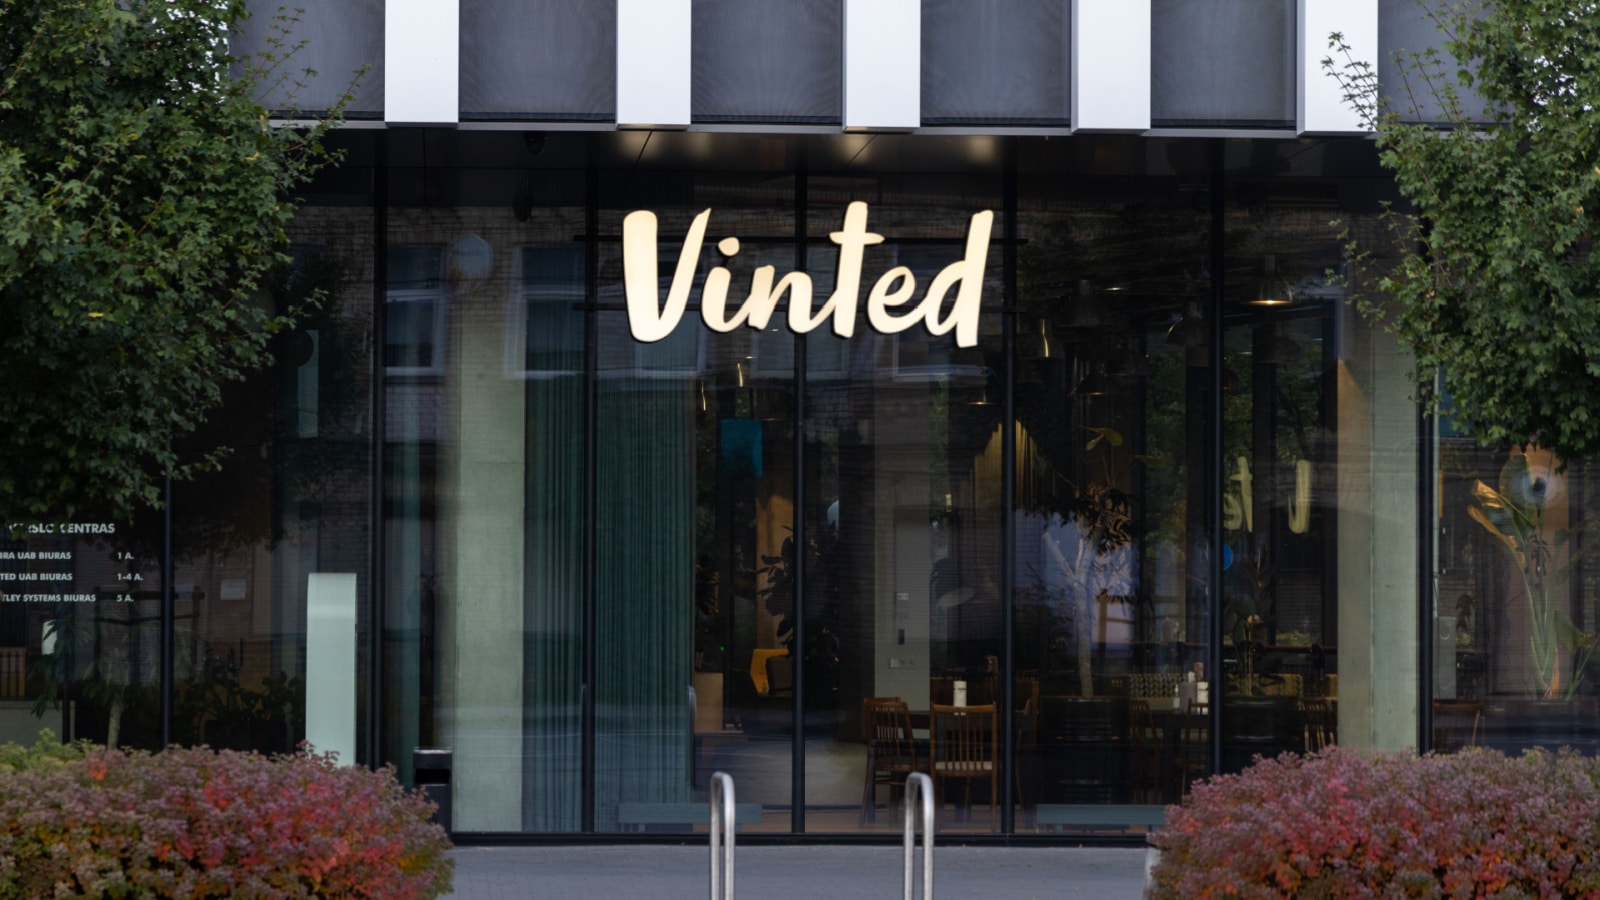 Vilnius, Lithuania - September 25, 2022: Vinted logo sign on main office, headquarters building wall. Vinted is online marketplace for second hand clothing, Unicorn startup